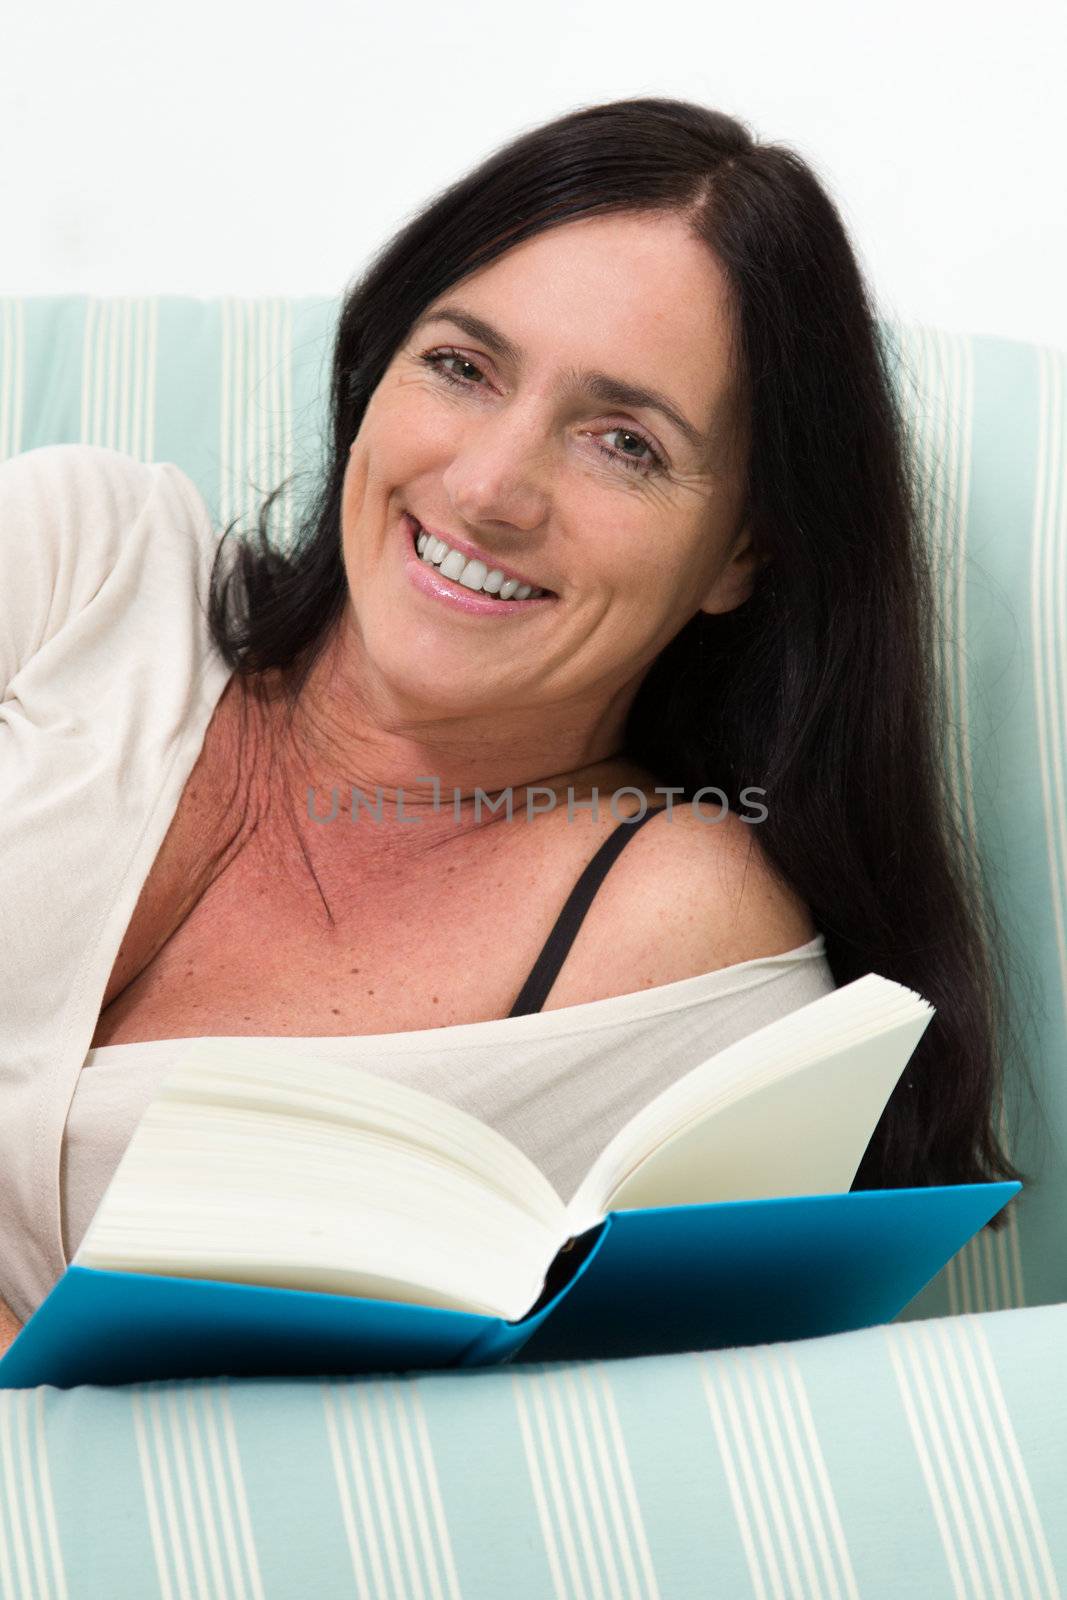 Dark haired woman lying on couch and reading a blue book